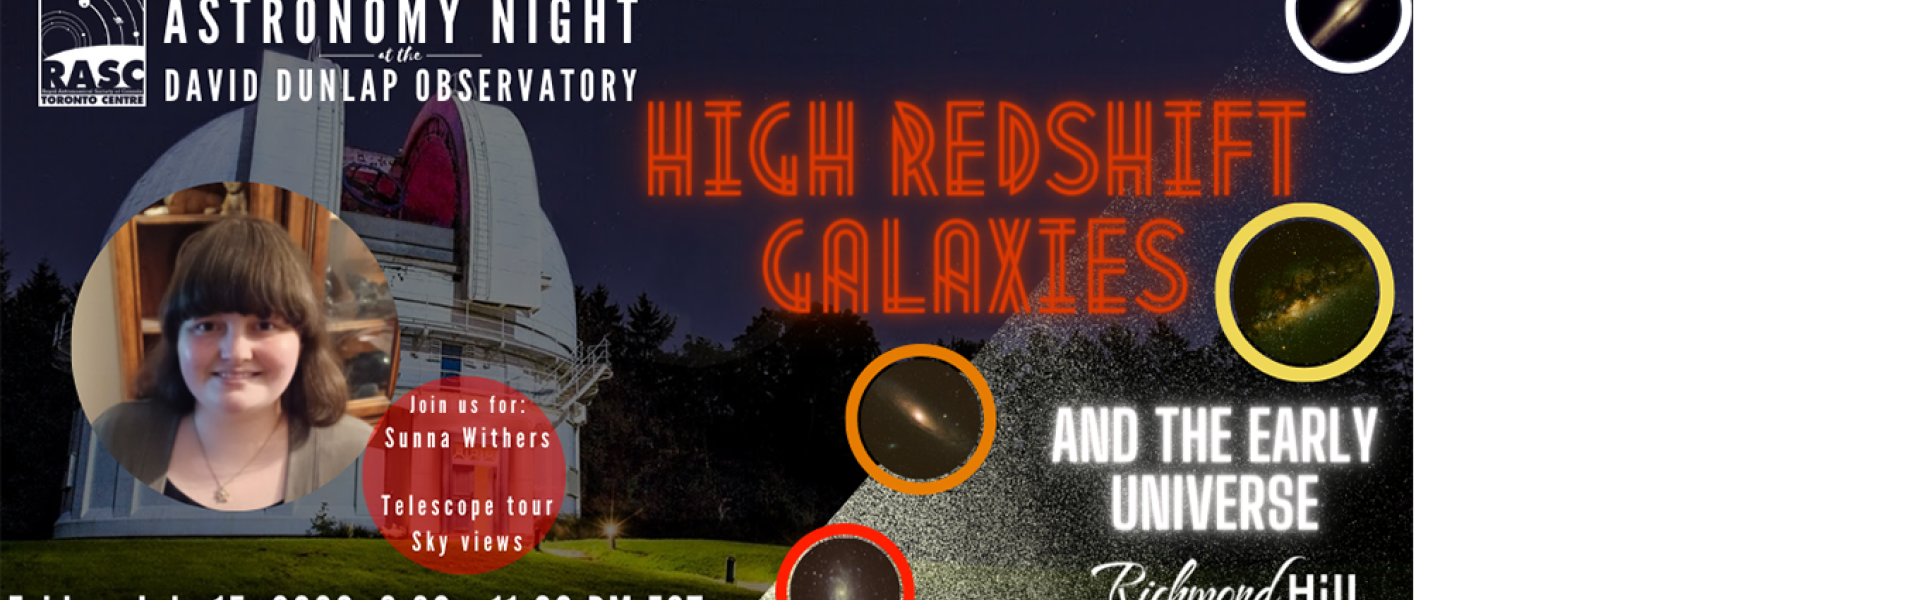 Astronomy Speaker's Night - High Redshift Galaxies and the Early Universe